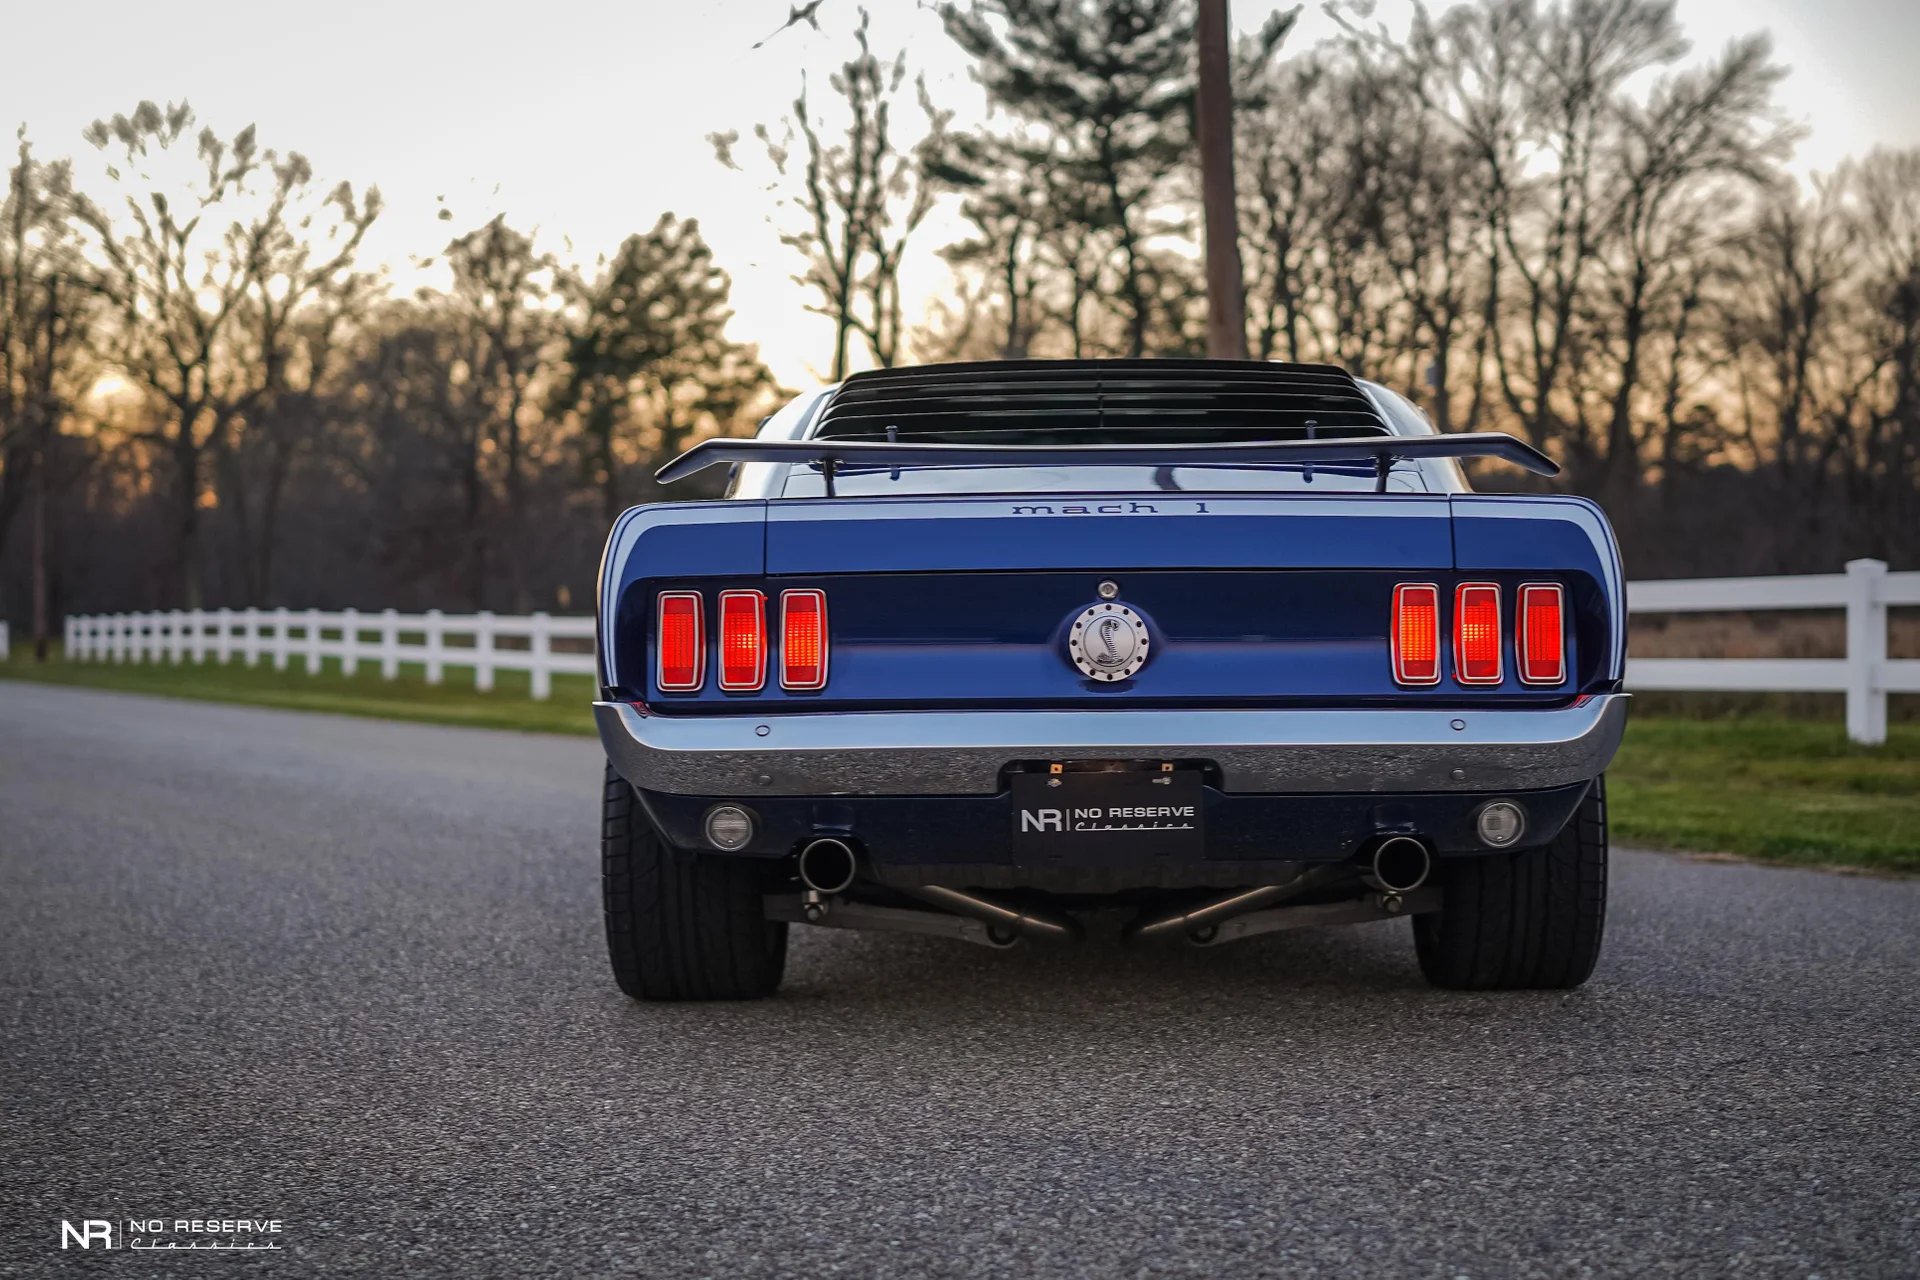 1969 ford mustang mach 1 svt supercharged terminator pro touring fastback